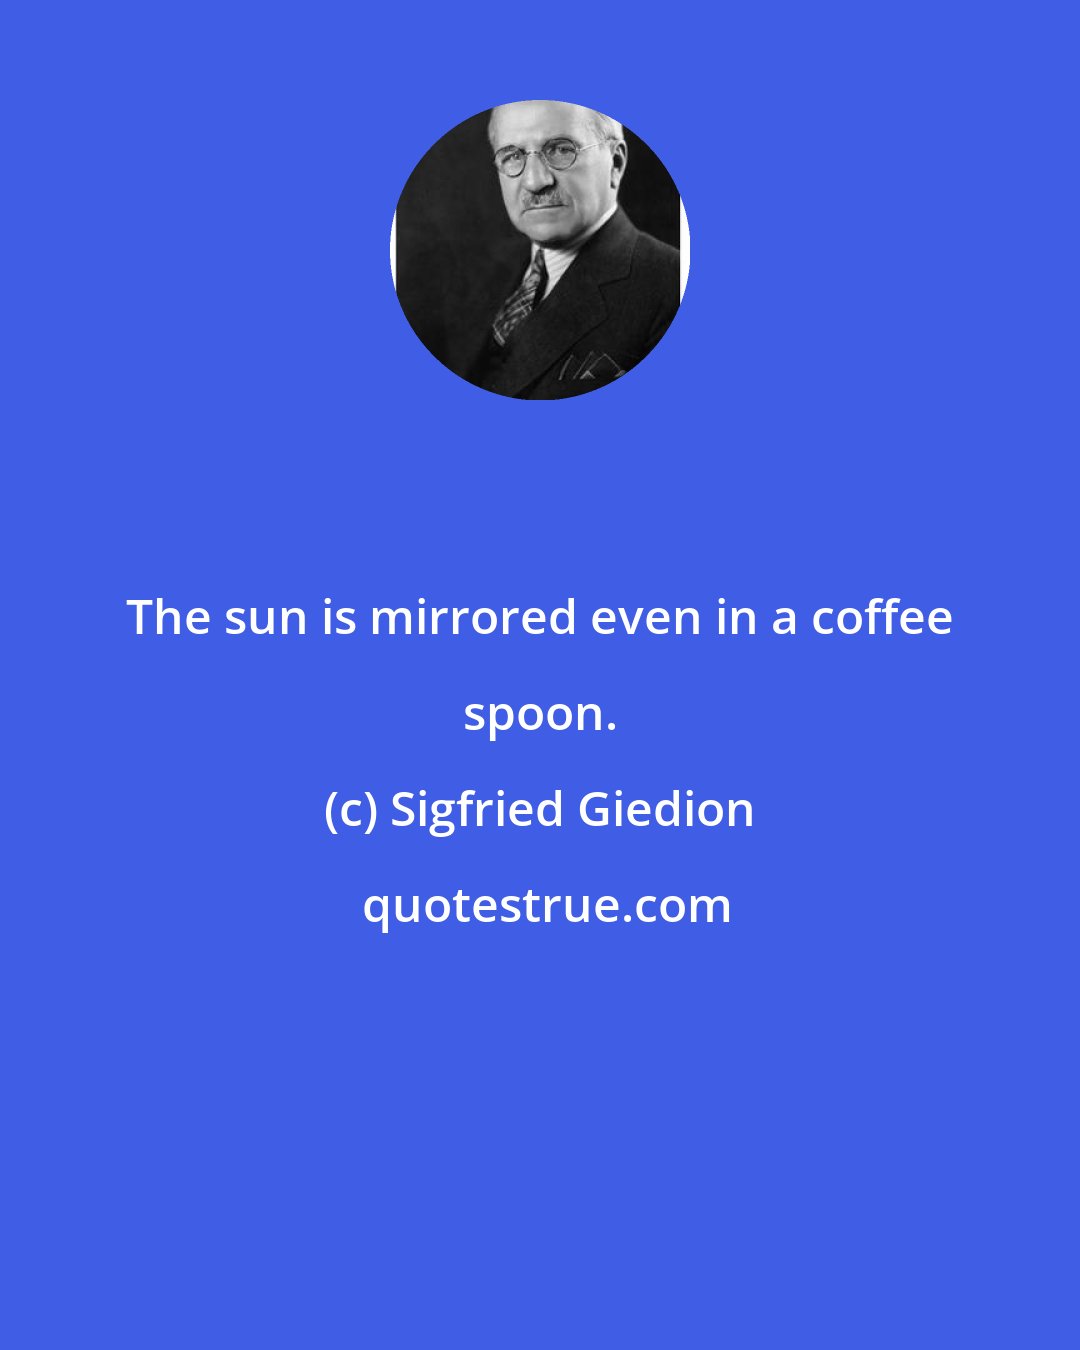 Sigfried Giedion: The sun is mirrored even in a coffee spoon.